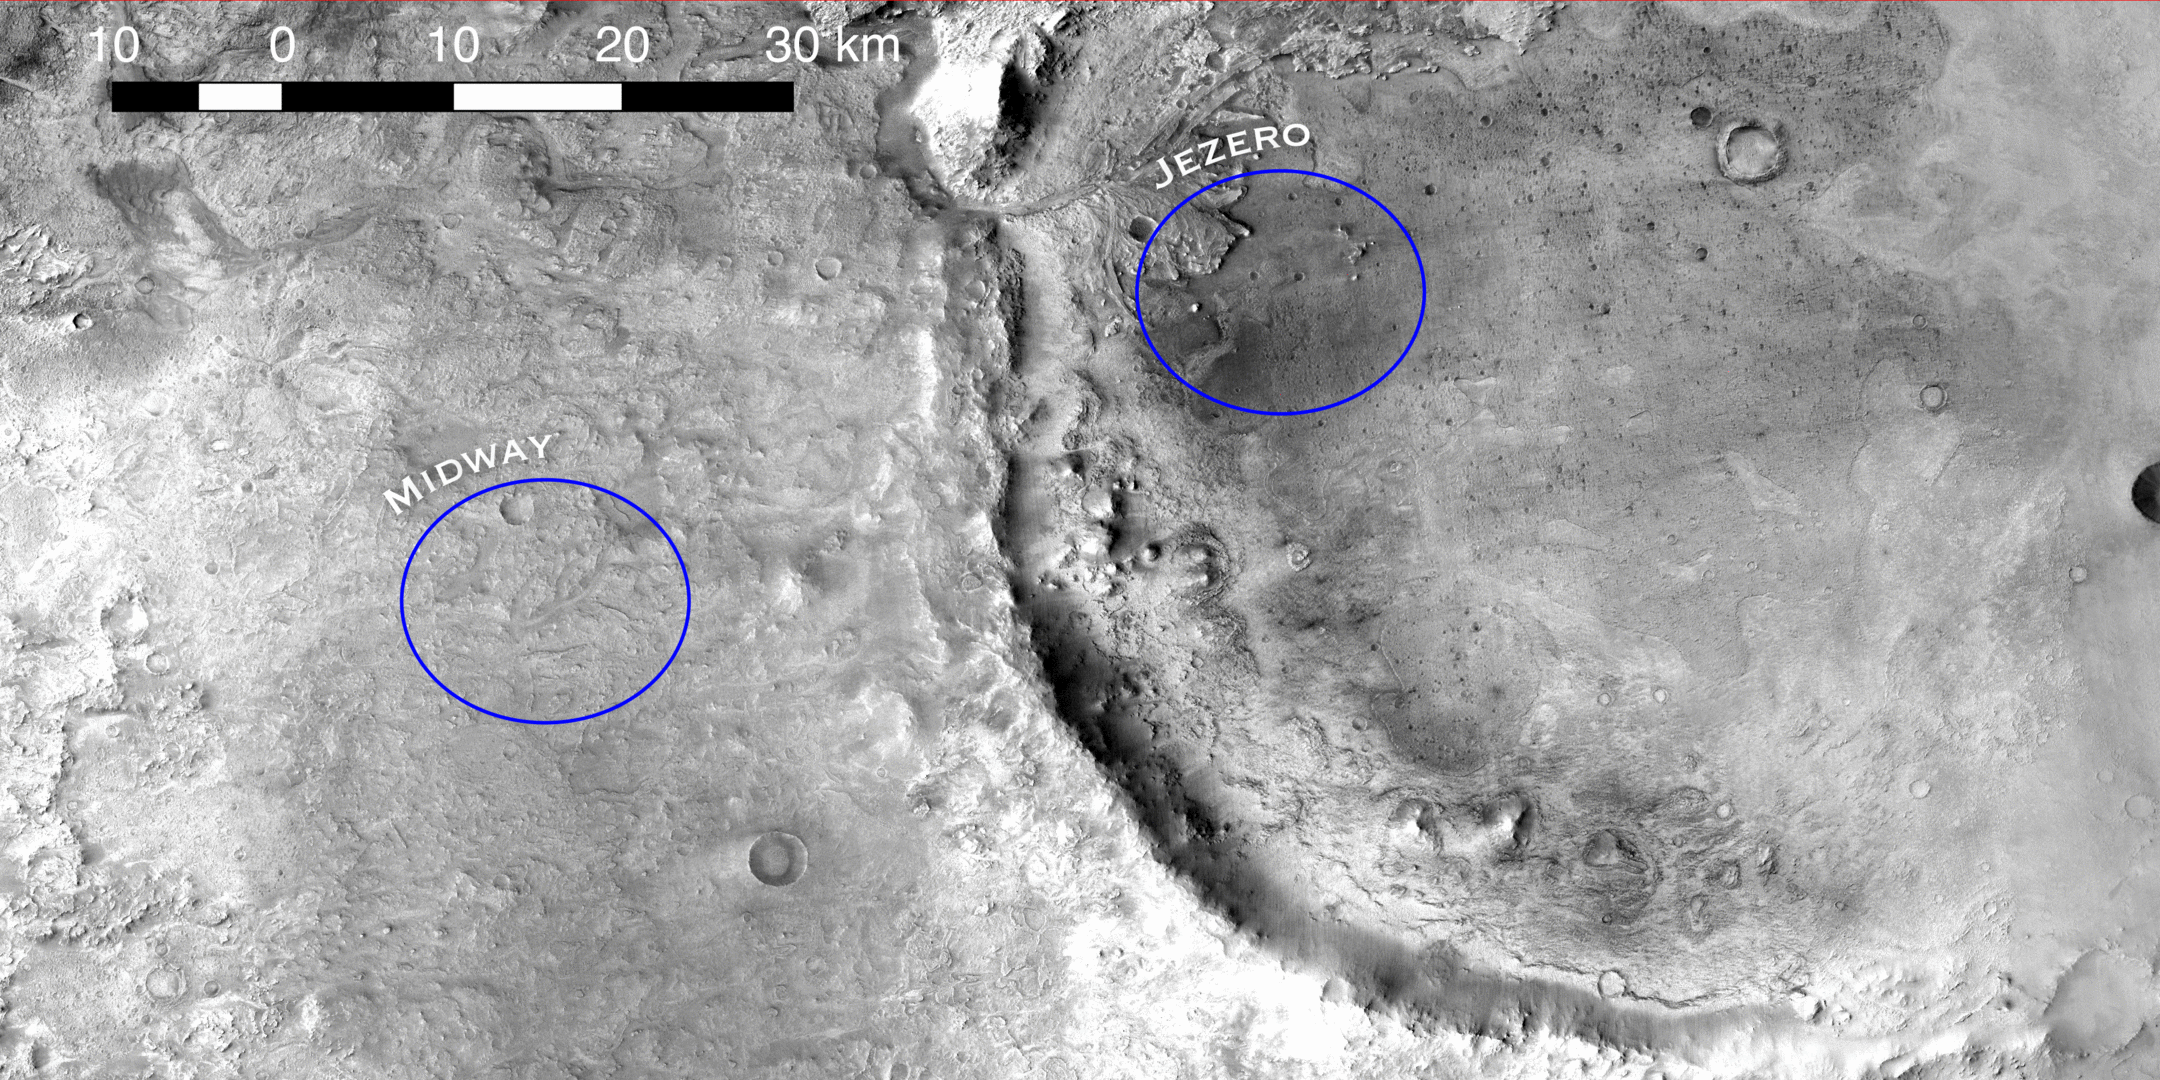 **Crater map relevant for the Mars 2020 rover mission.** The blue ellipses are two candidate landing zones for the upcoming Mars 2020 rover launch and green boxes represent detected craters. The Jezero landing site (right ellipse in this animation) [was chosen in November 2018](https://www.nasa.gov/press-release/nasa-announces-landing-site-for-mars-2020-rover/) after a thorough selection process.